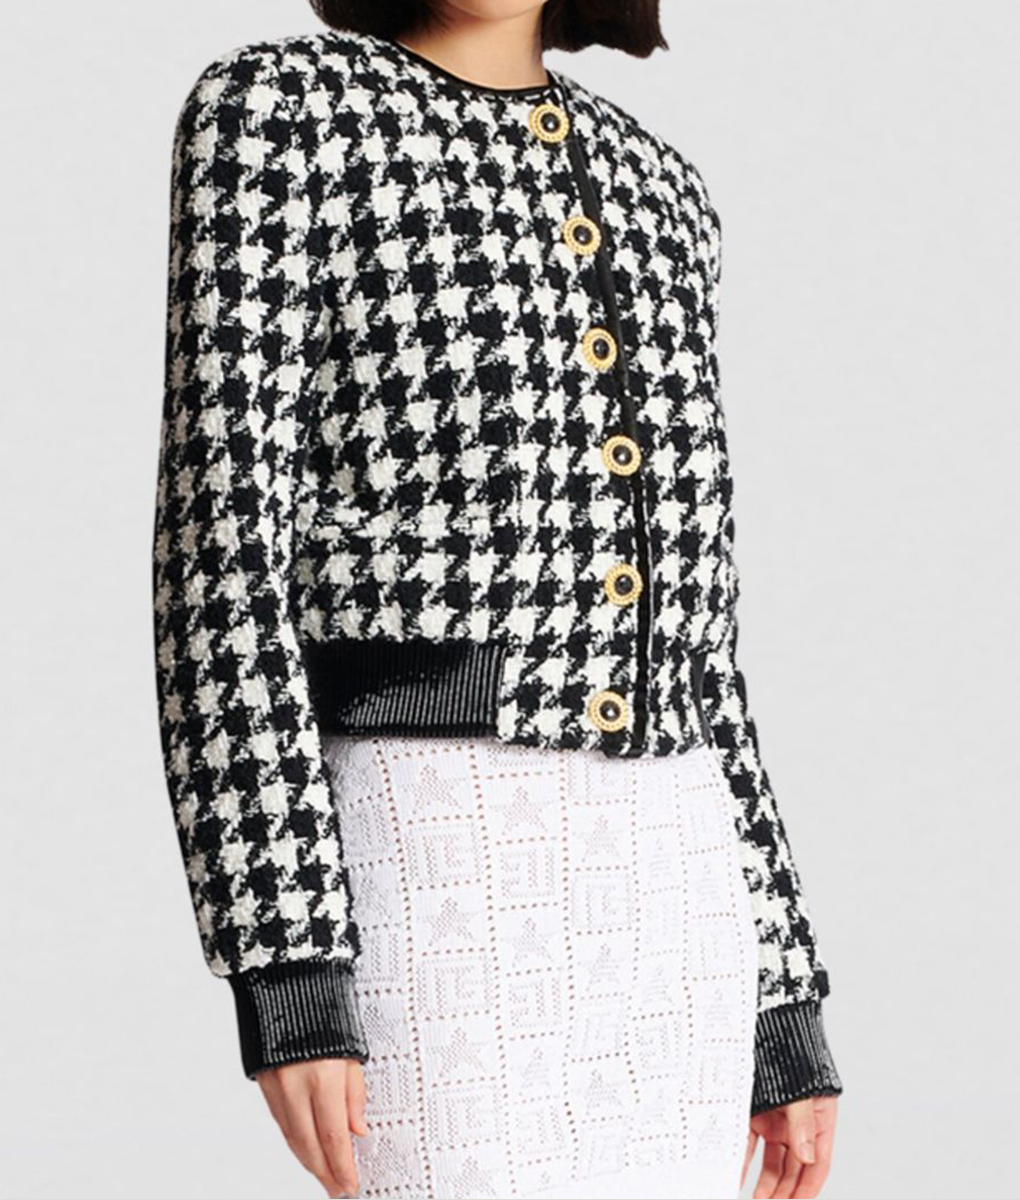 Today Show Alison Brie Houndstooth Jacket (9)